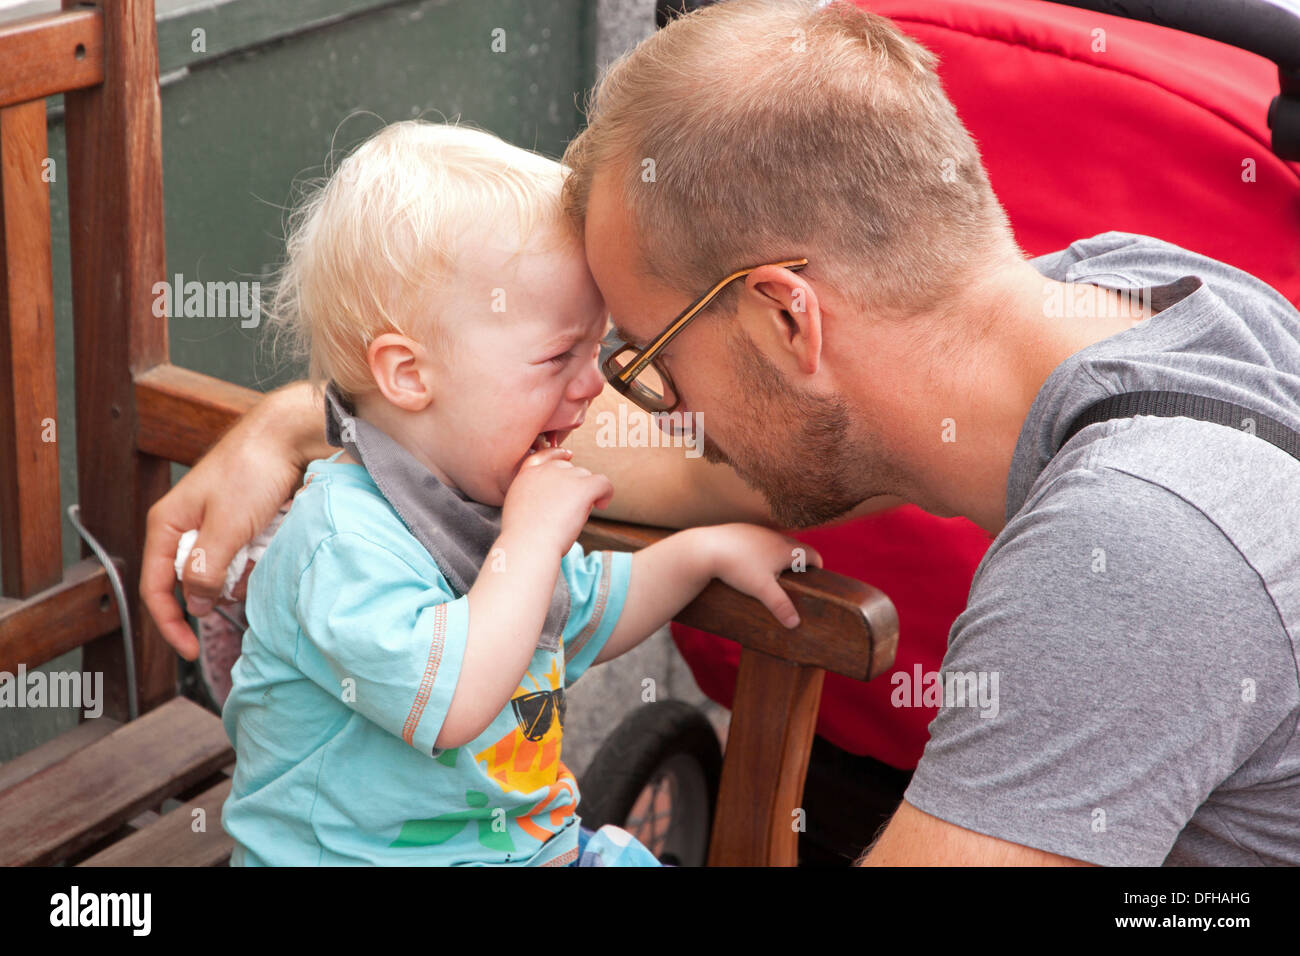 Crying child being comforted and calmed by his father. Stock Photo